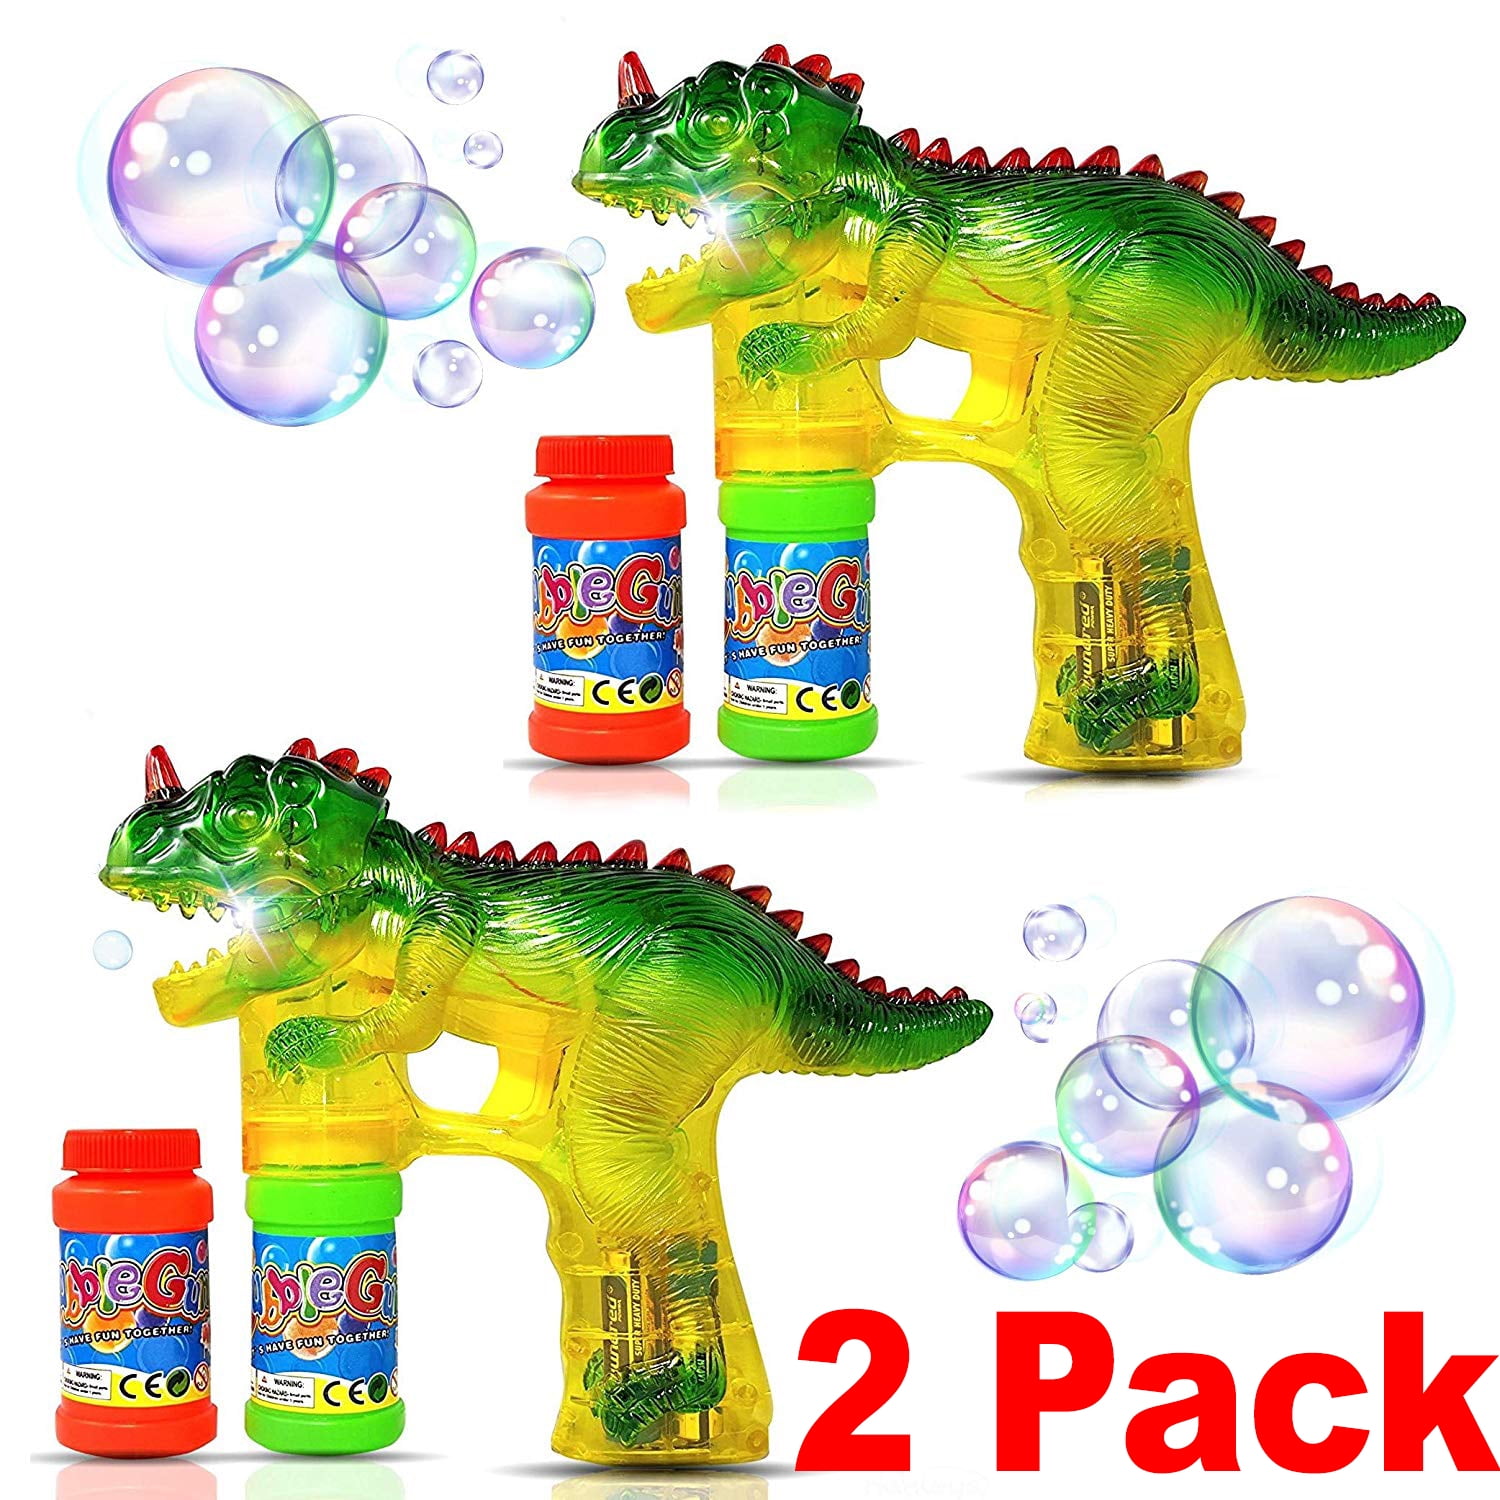 2 LED Light Up Bubble Blower Gun Flashing Lights Squirt Party Favor Summer Toys